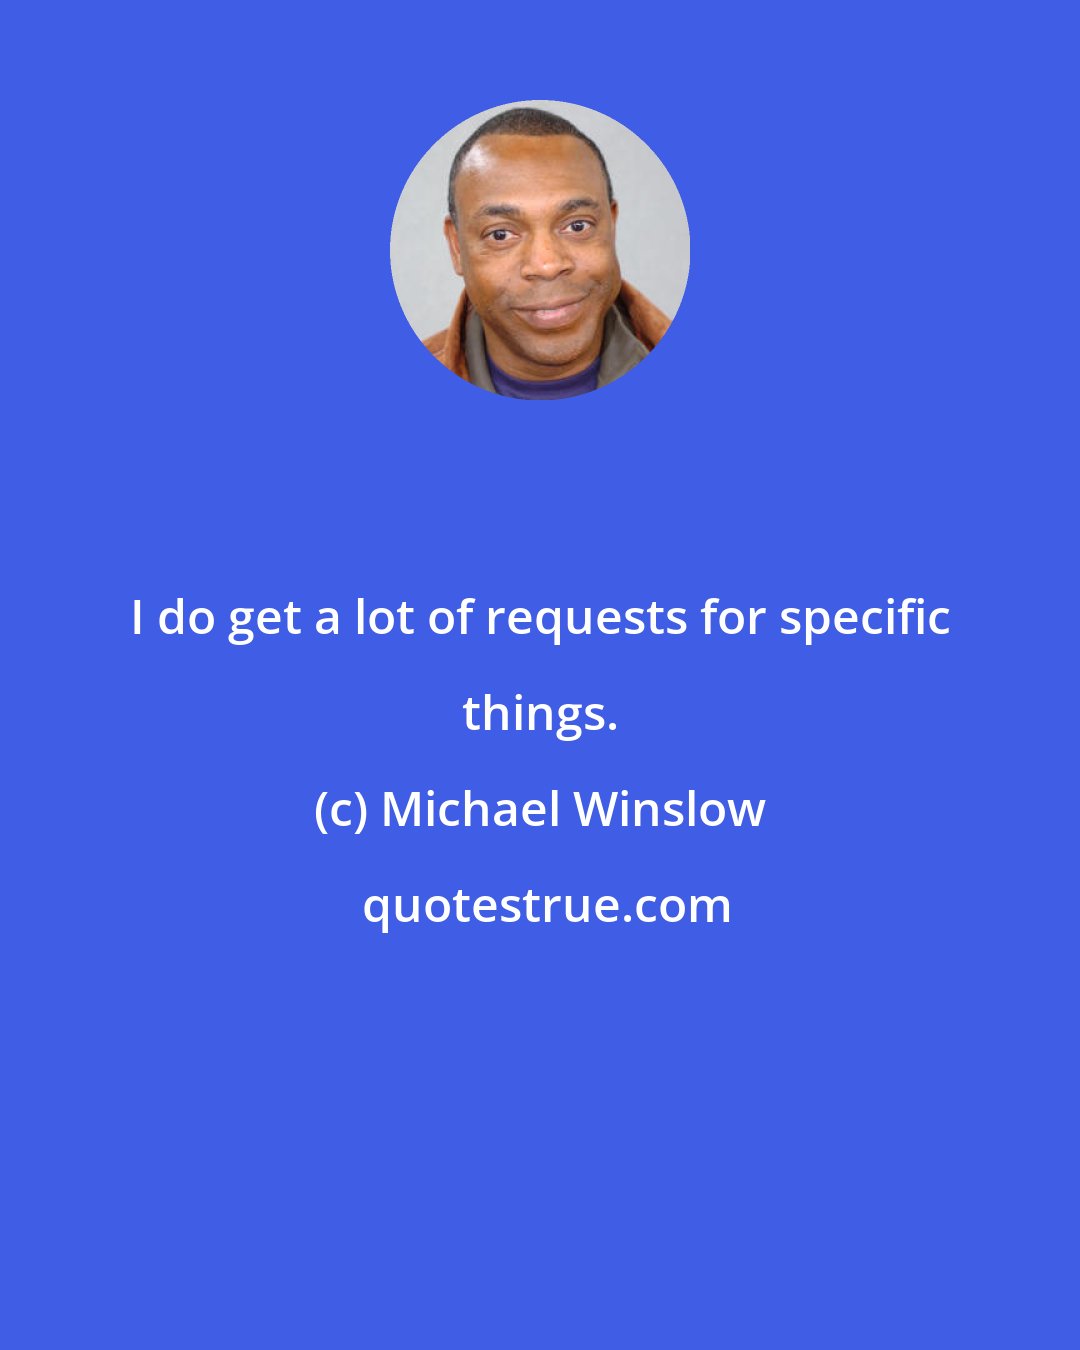 Michael Winslow: I do get a lot of requests for specific things.